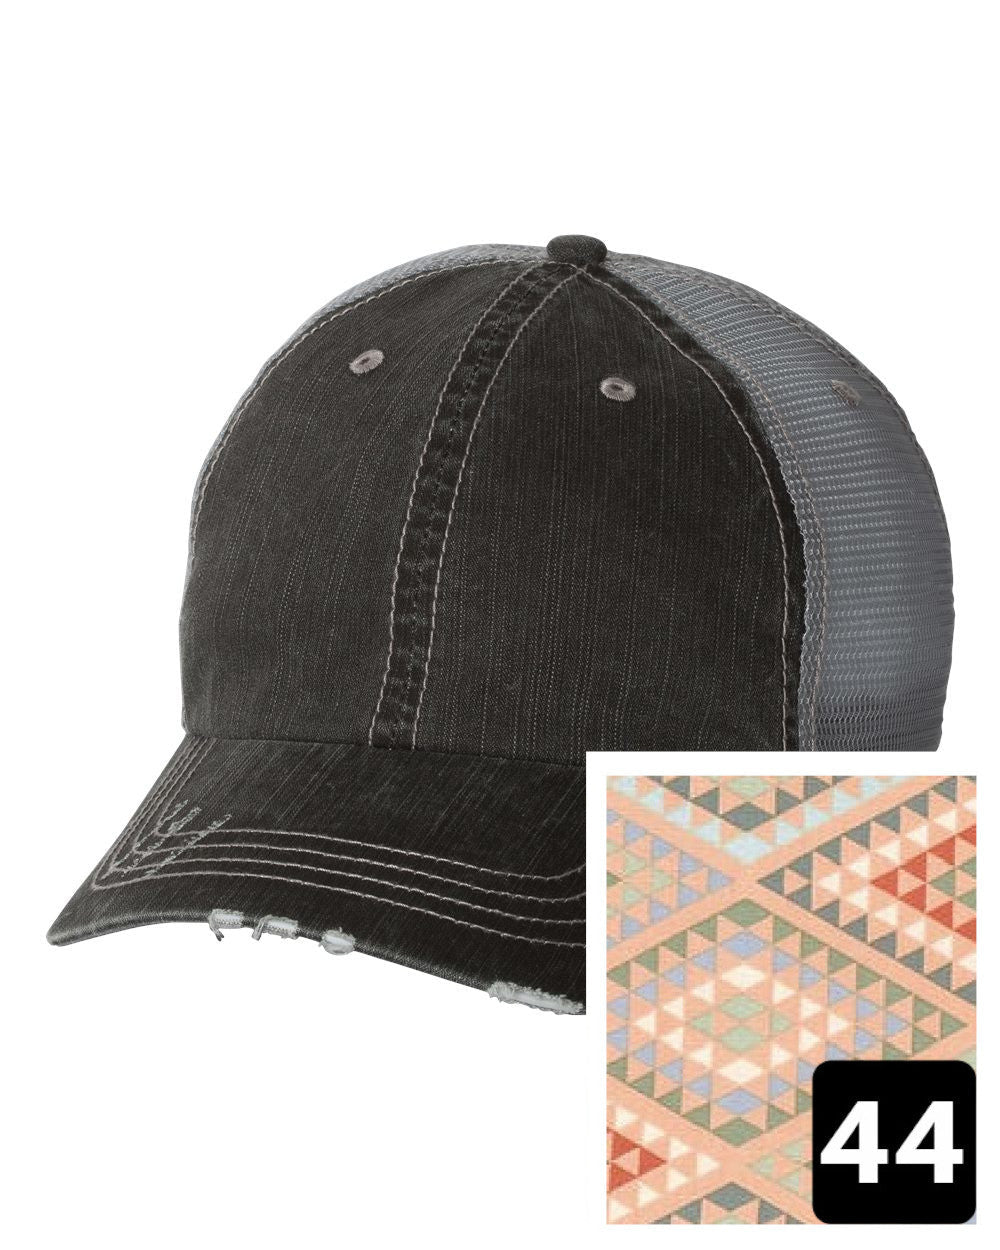 gray distressed trucker hat with navy coral and white chevron fabric state of Georgia